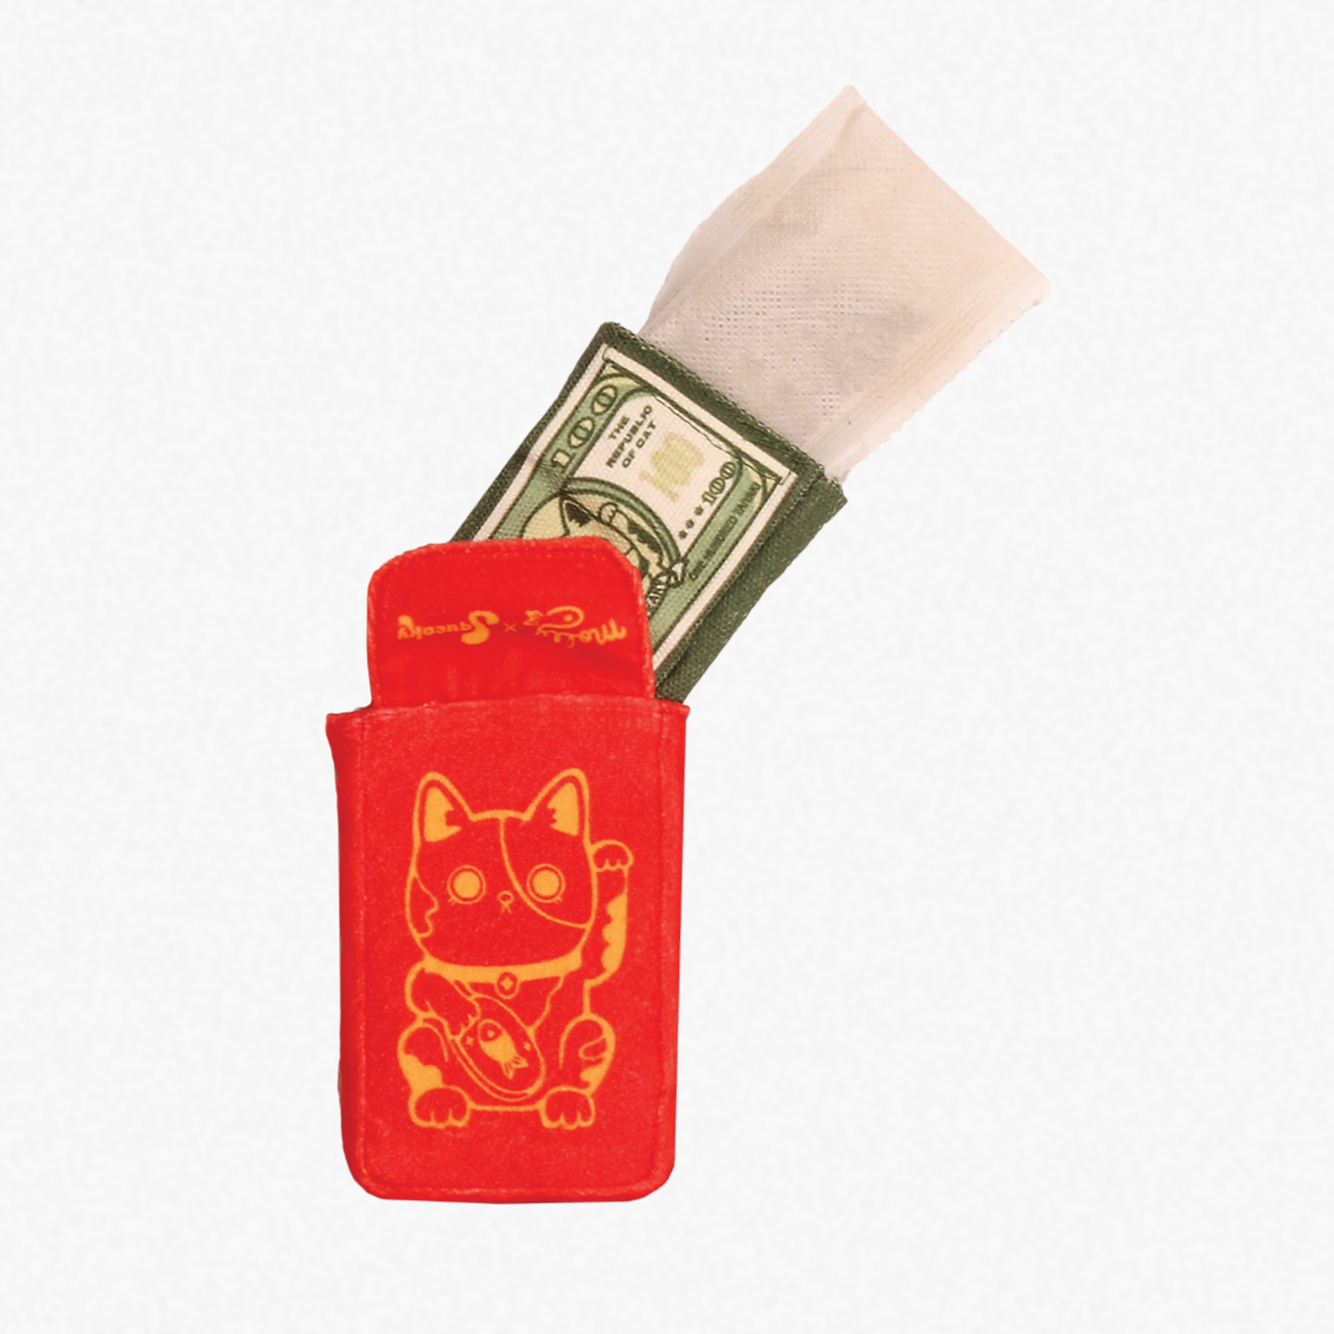 MollyDraws X Squeaky LNY Cat Kitten Lucky Red Envelope Pocket Toy